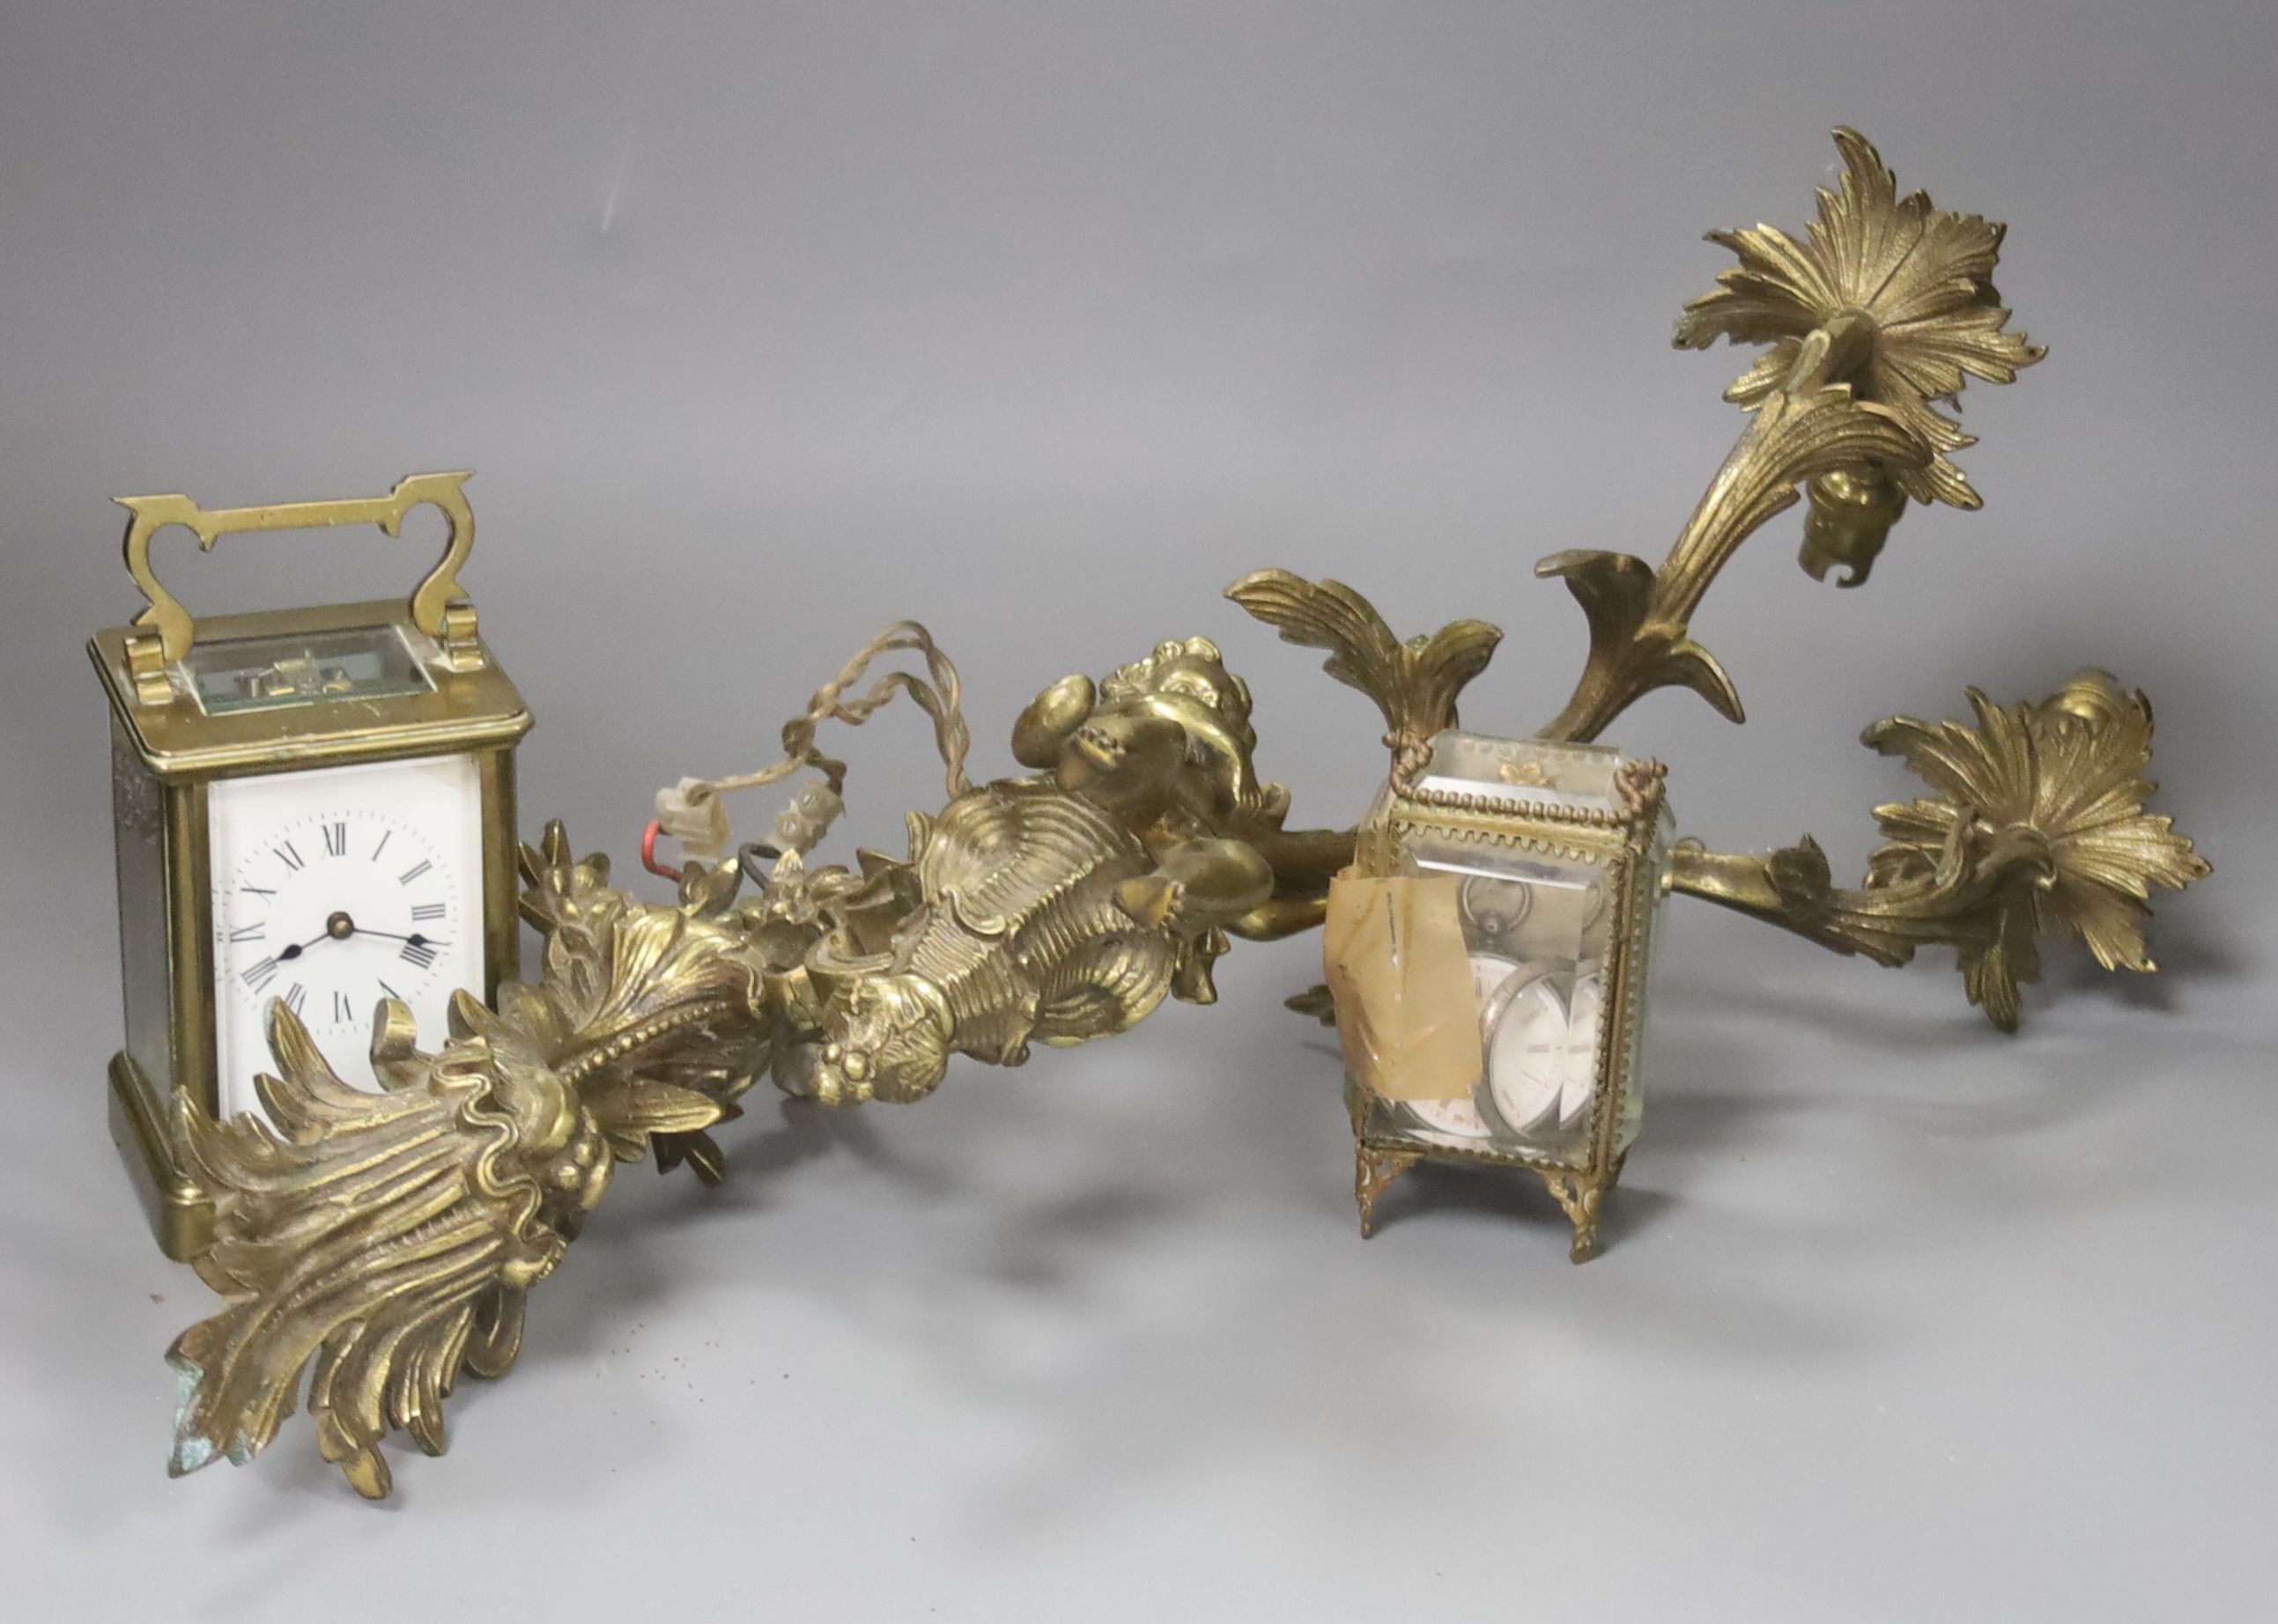 A brass carriage timepiece, a brass casket containing silver watch and a brass rococo-style twin-sconce wall light